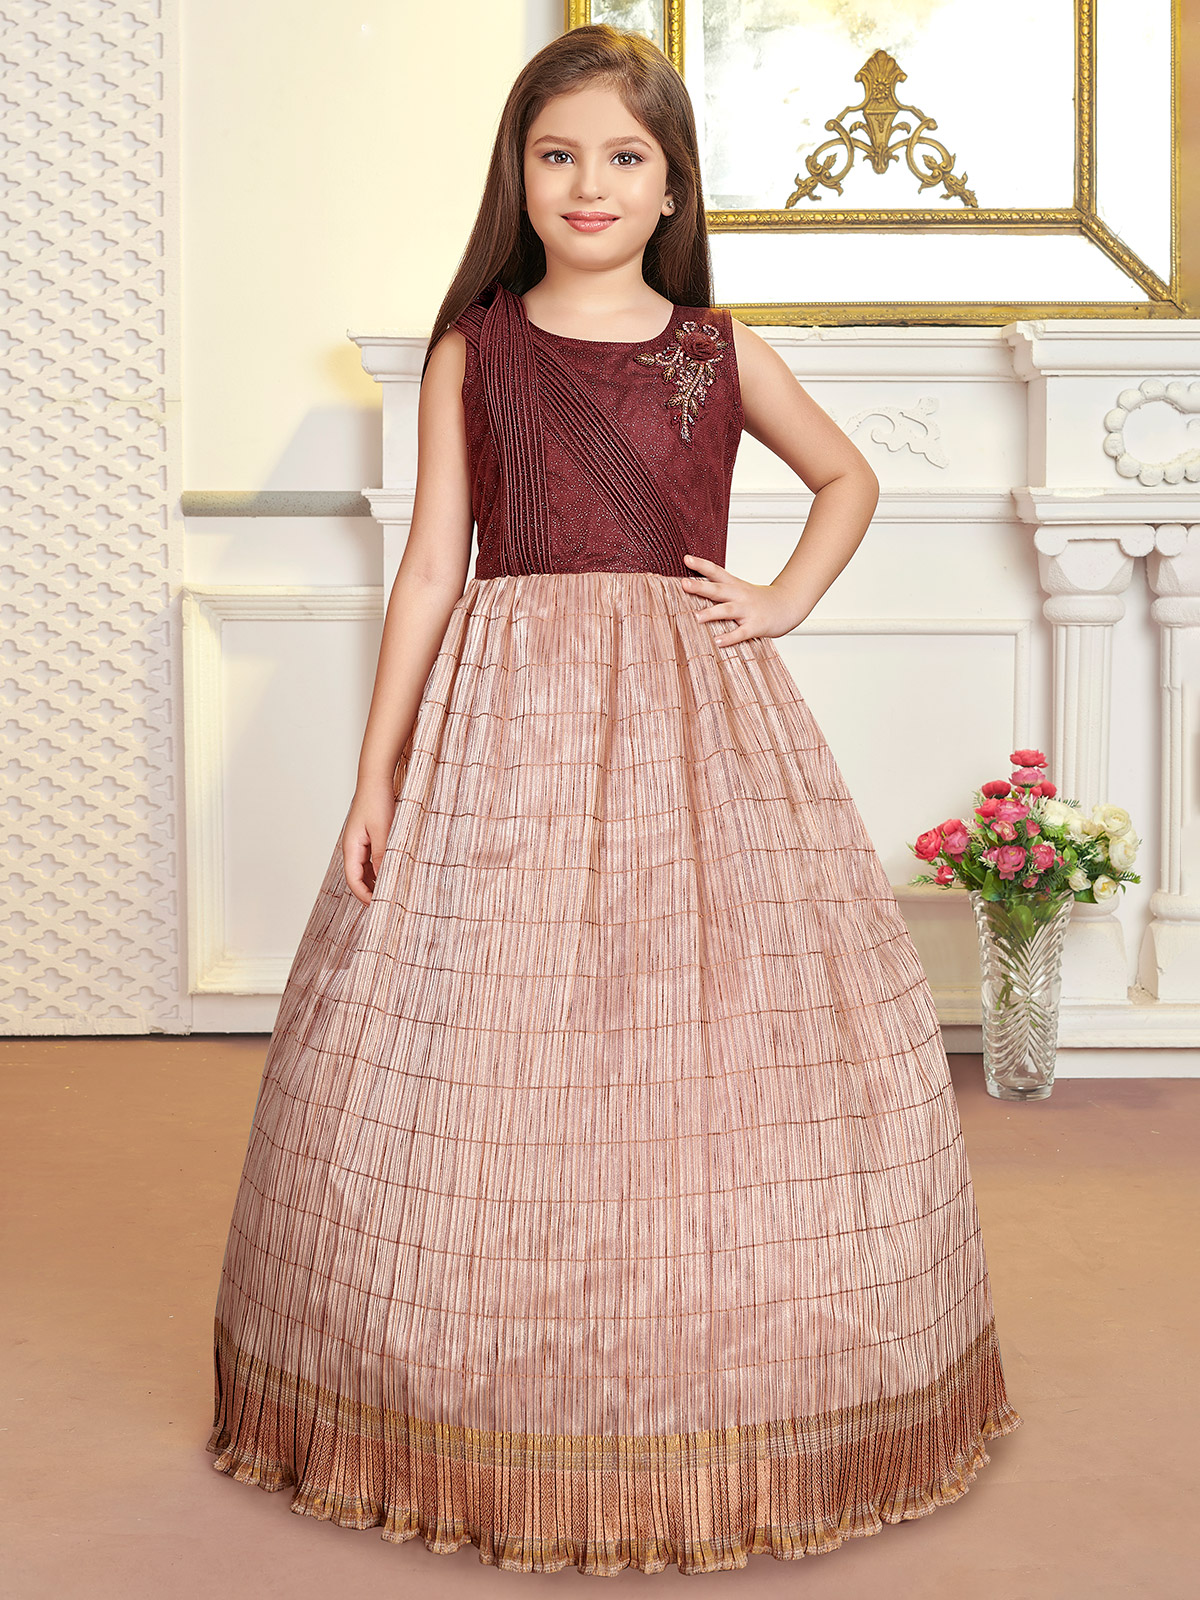 Pakistani organza dress in peach color hand embroidered – Nameera by Farooq